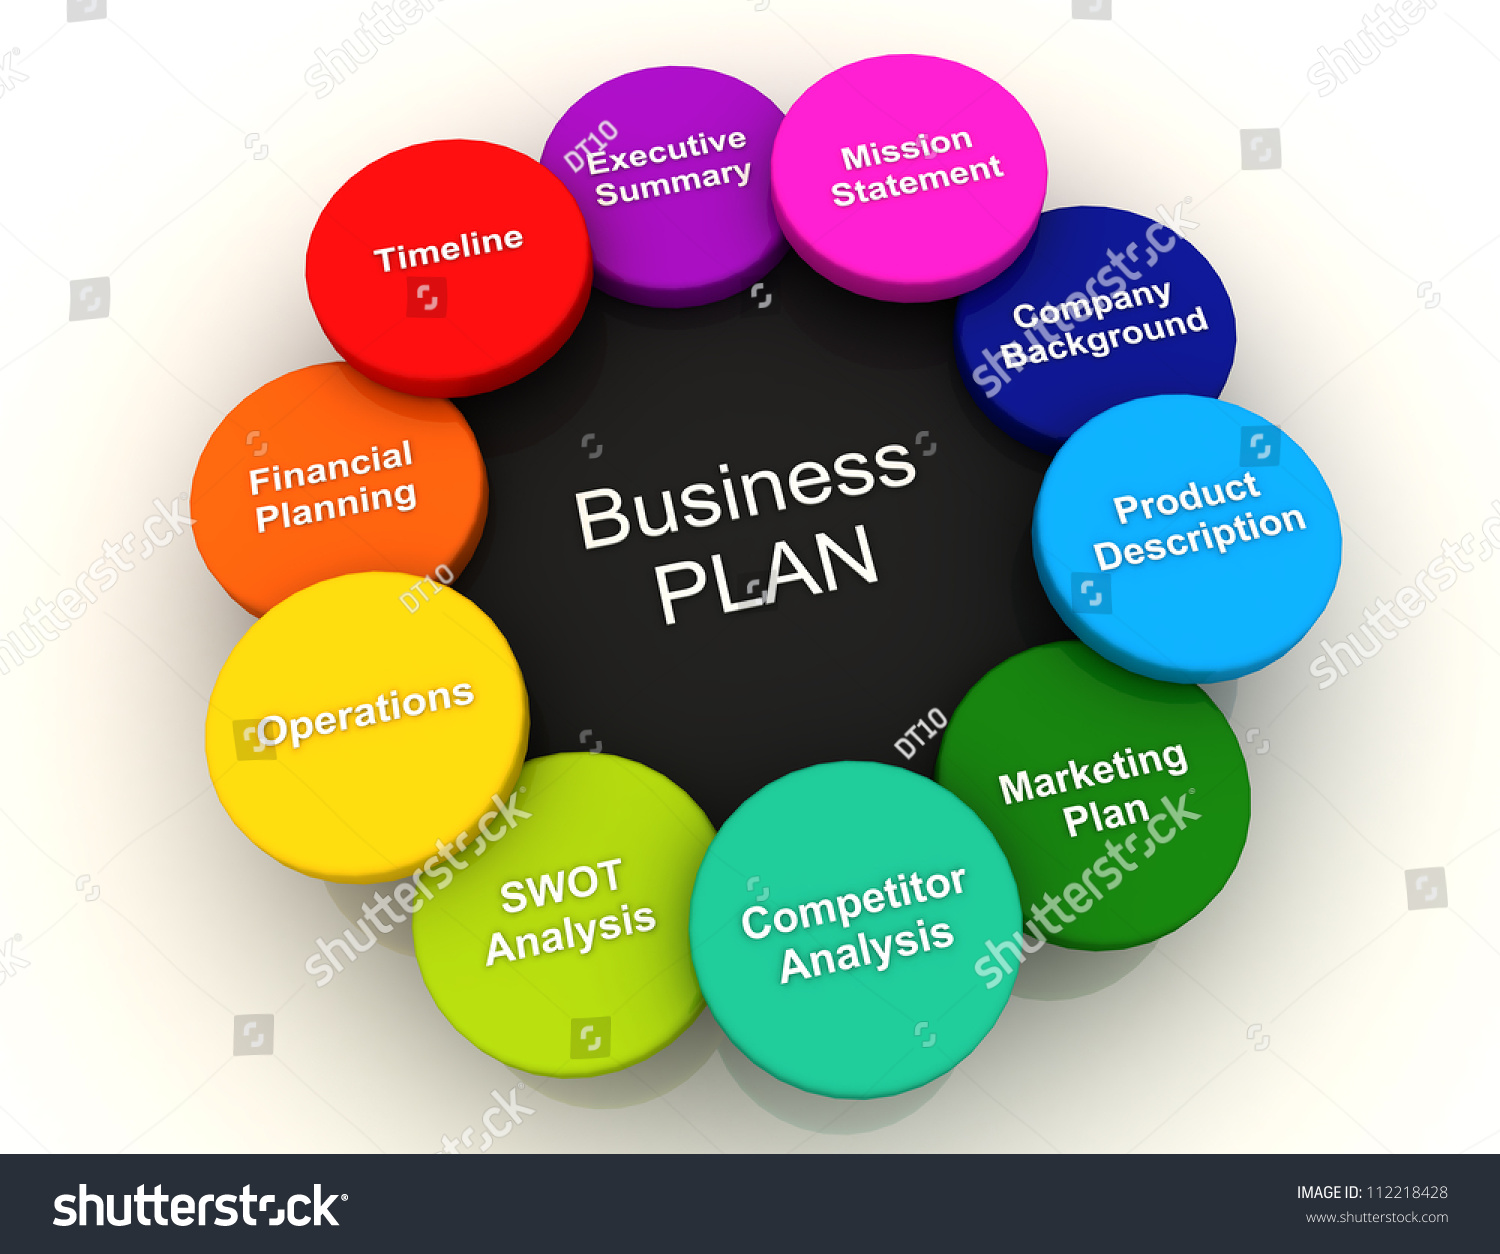 Chart of business plan